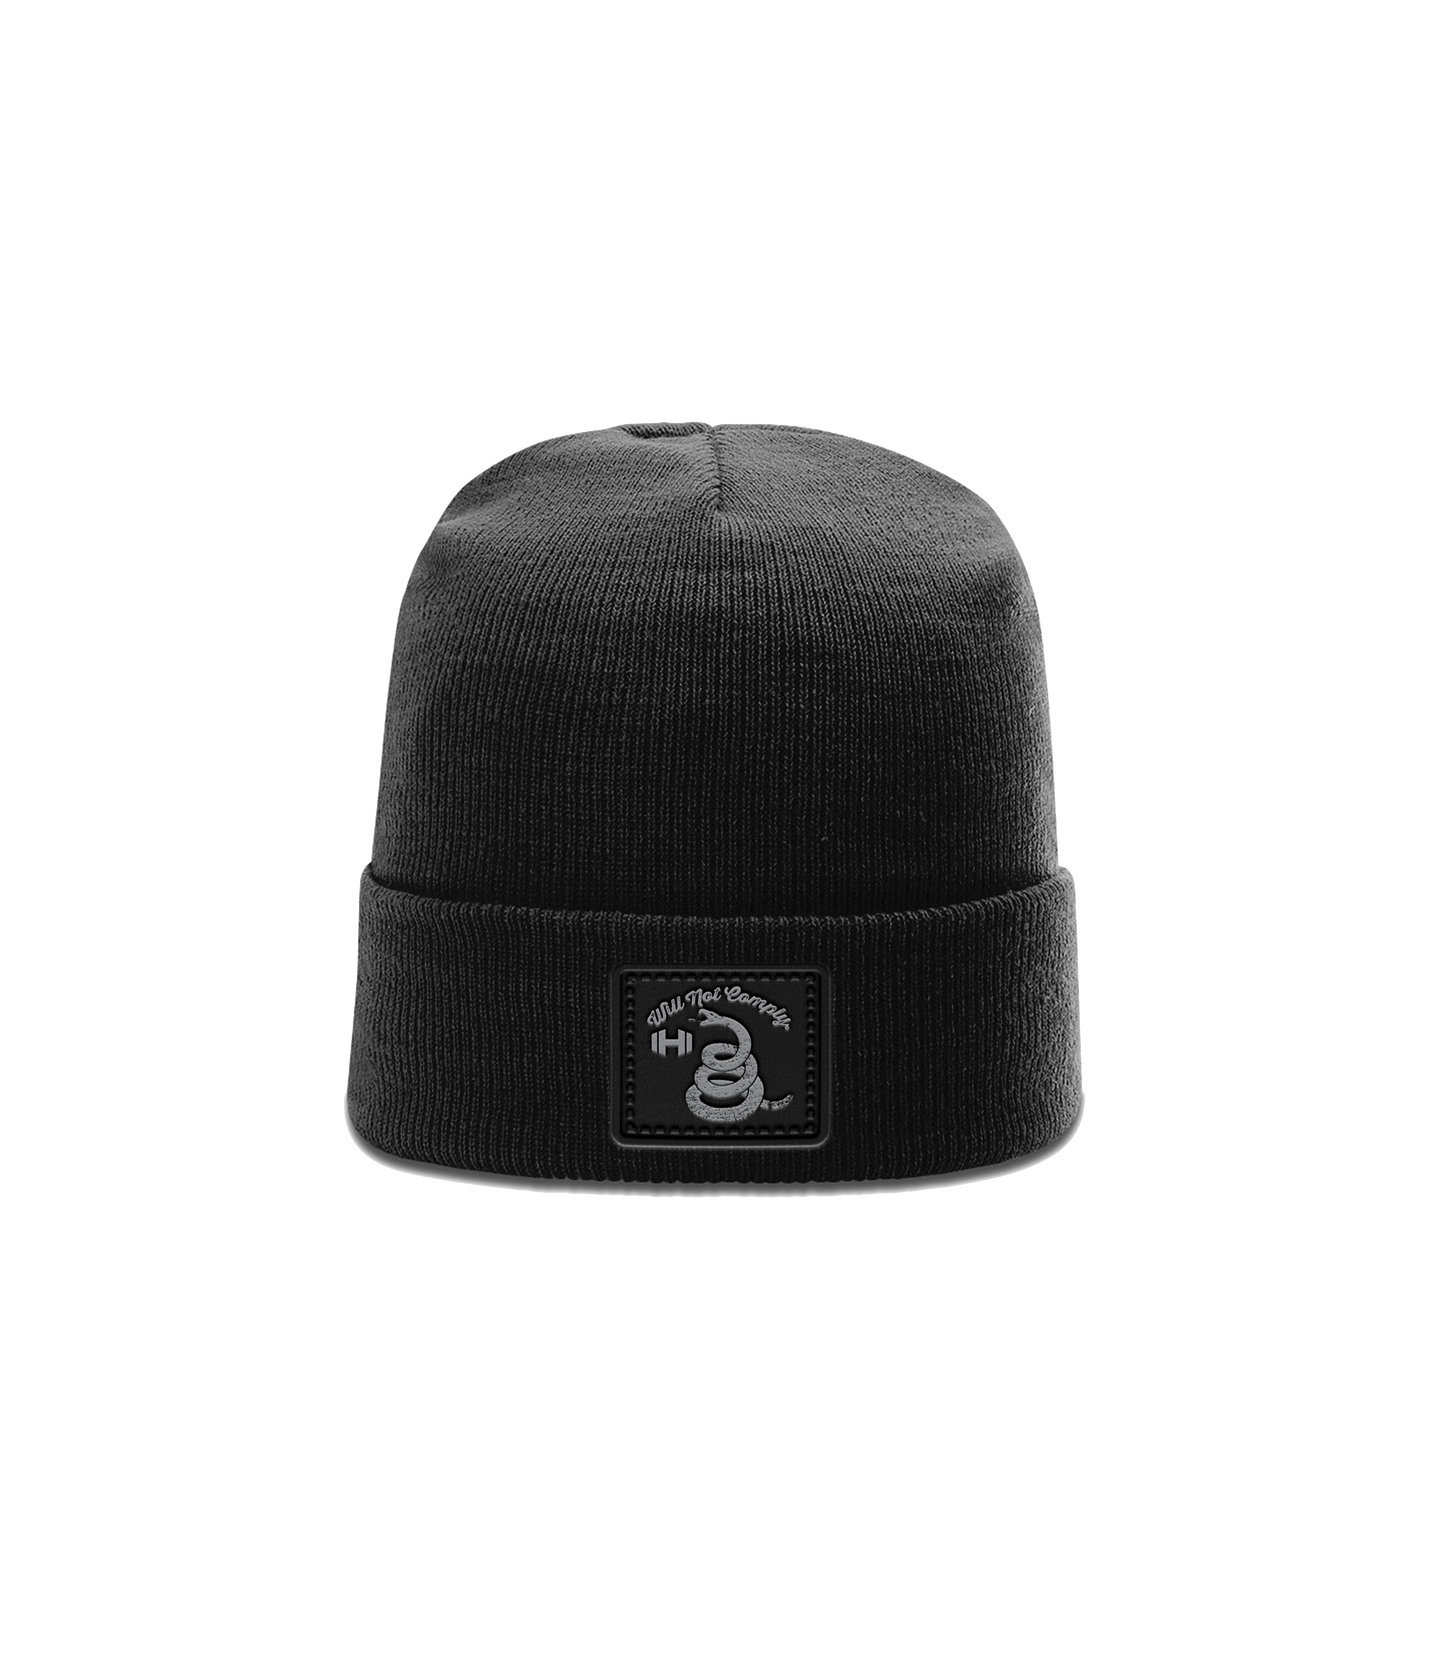 Leather Will Not Comply Cuff Beanie